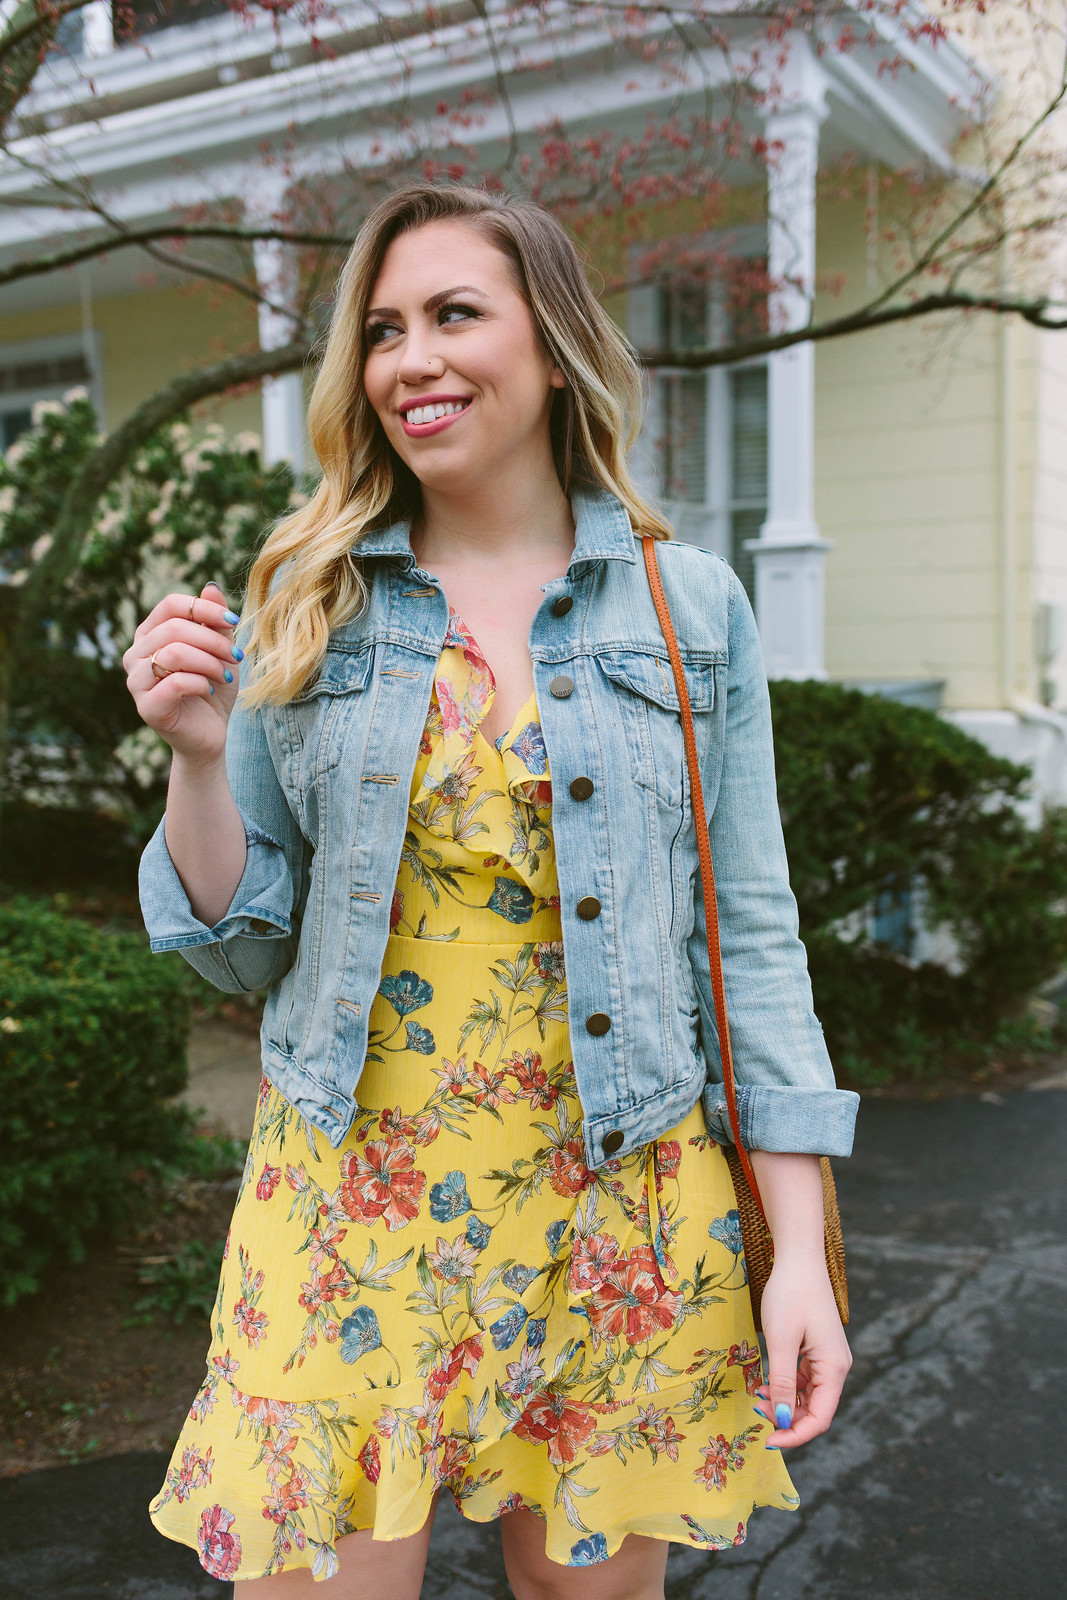 How to Style a Jean Jacket Denim Jacket Summer Outfit Yellow Dress